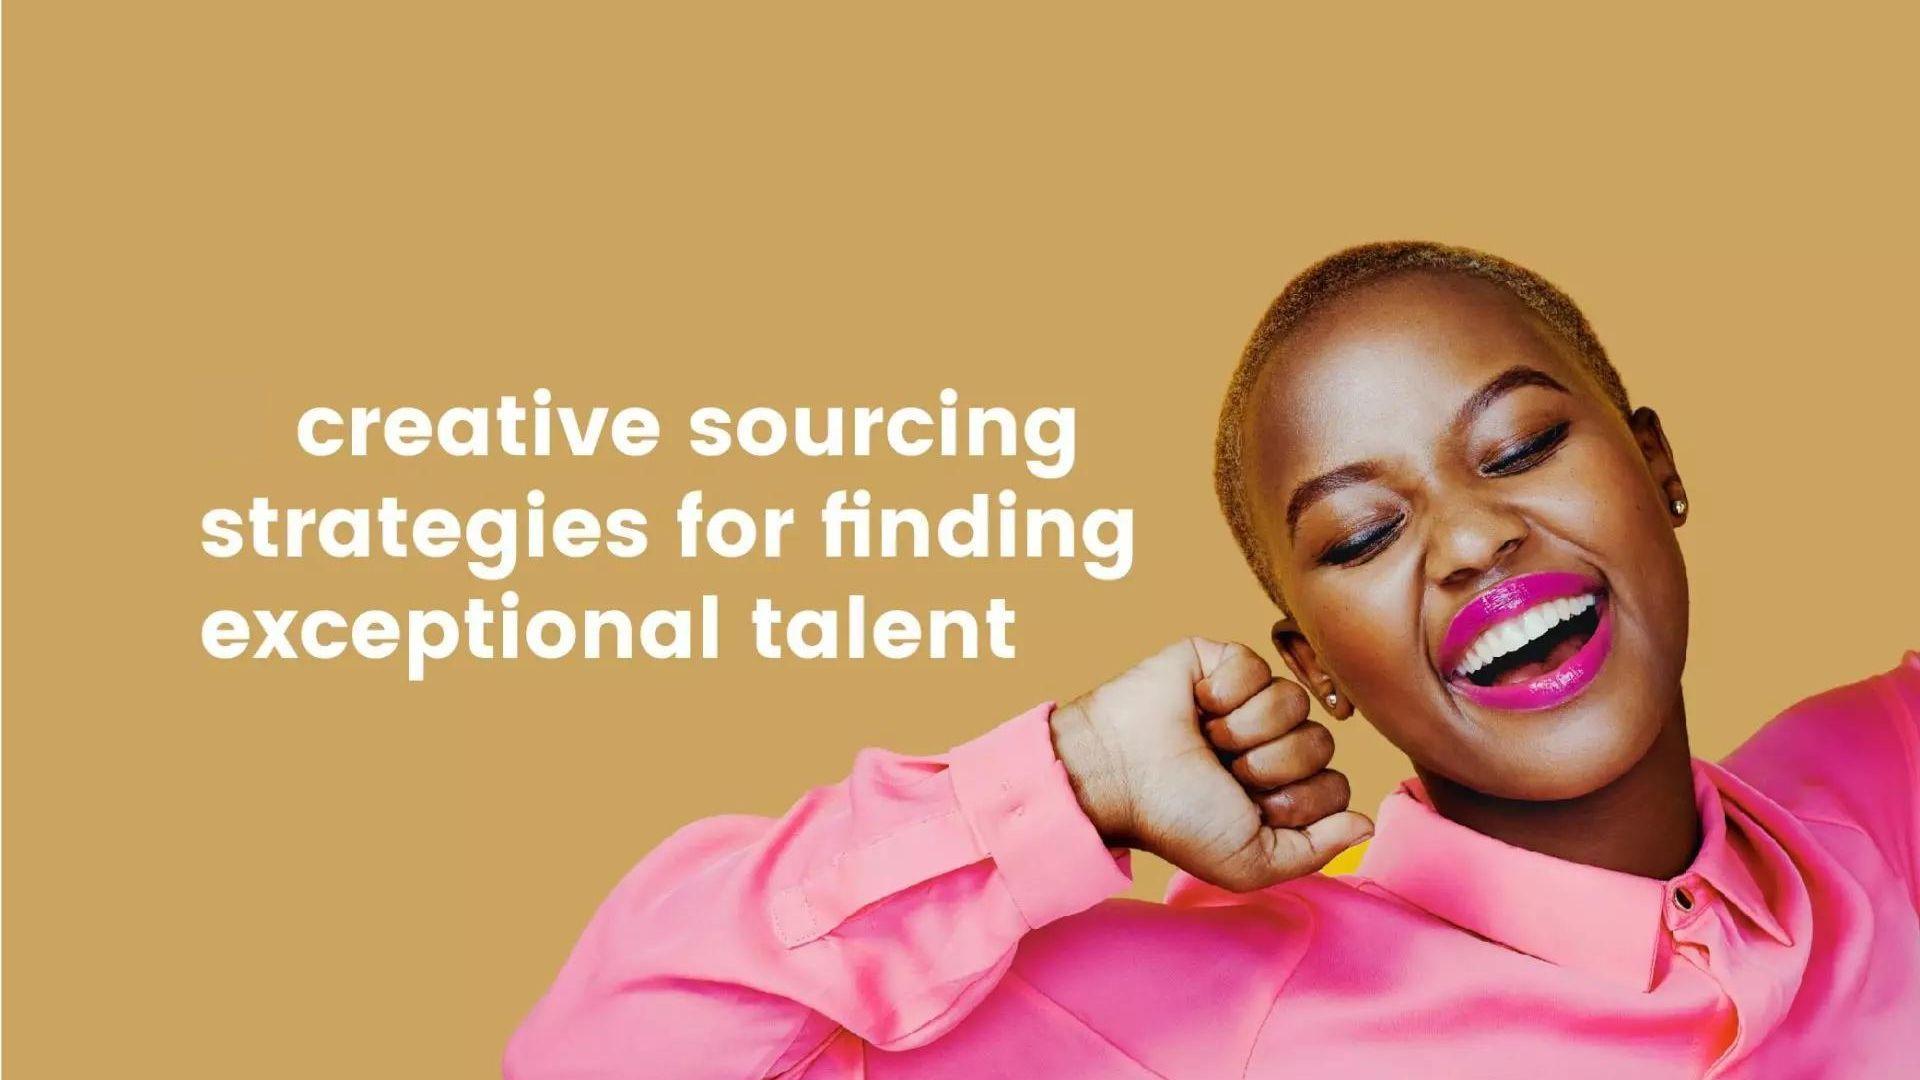 Сreative sourcing strategies for finding exceptional talent